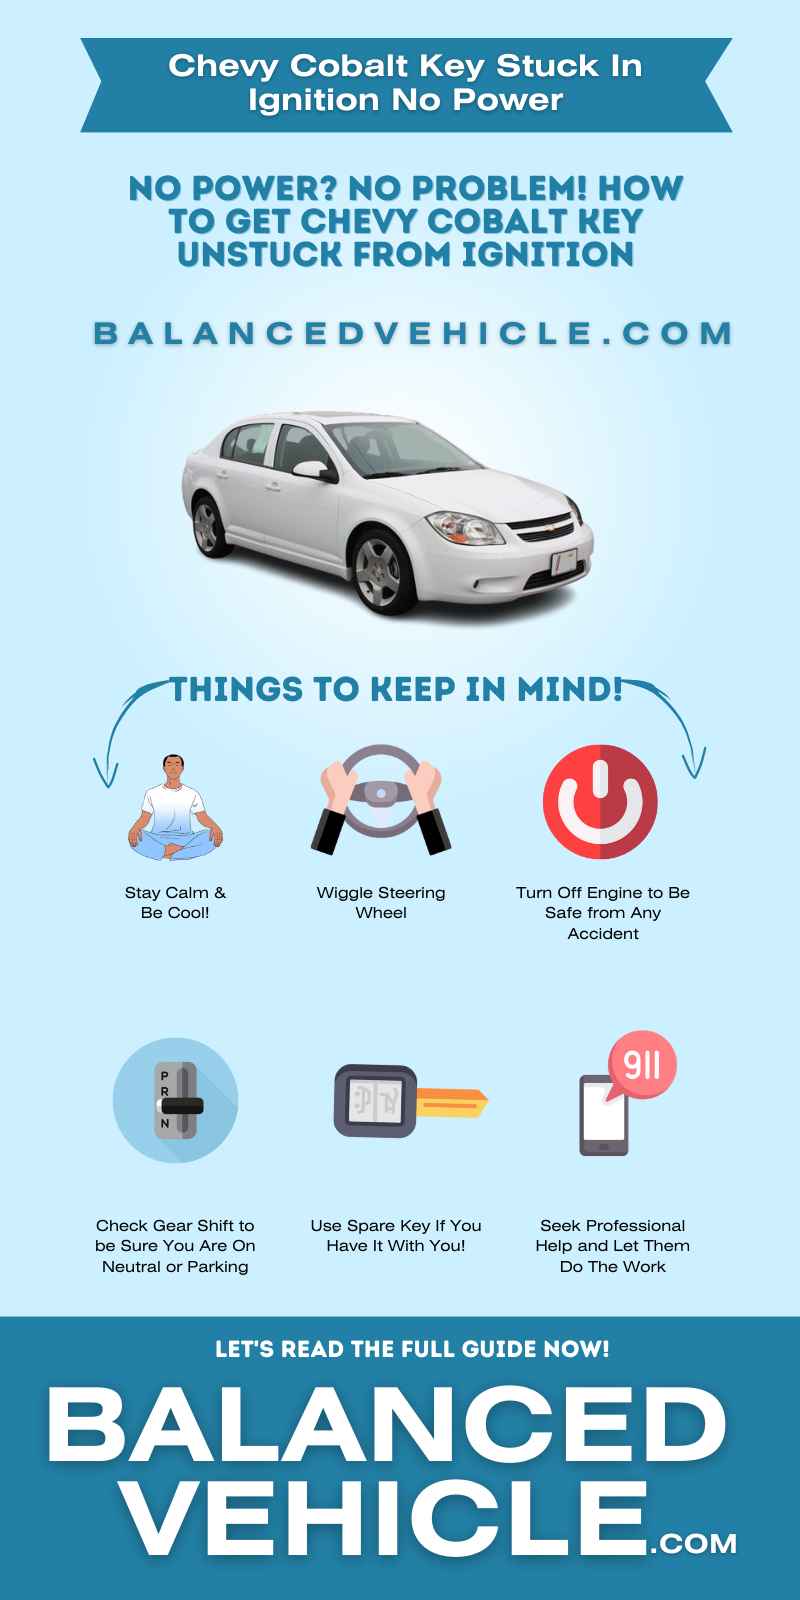 Chevy Cobalt Key Stuck In Ignition No Power - Infographic 